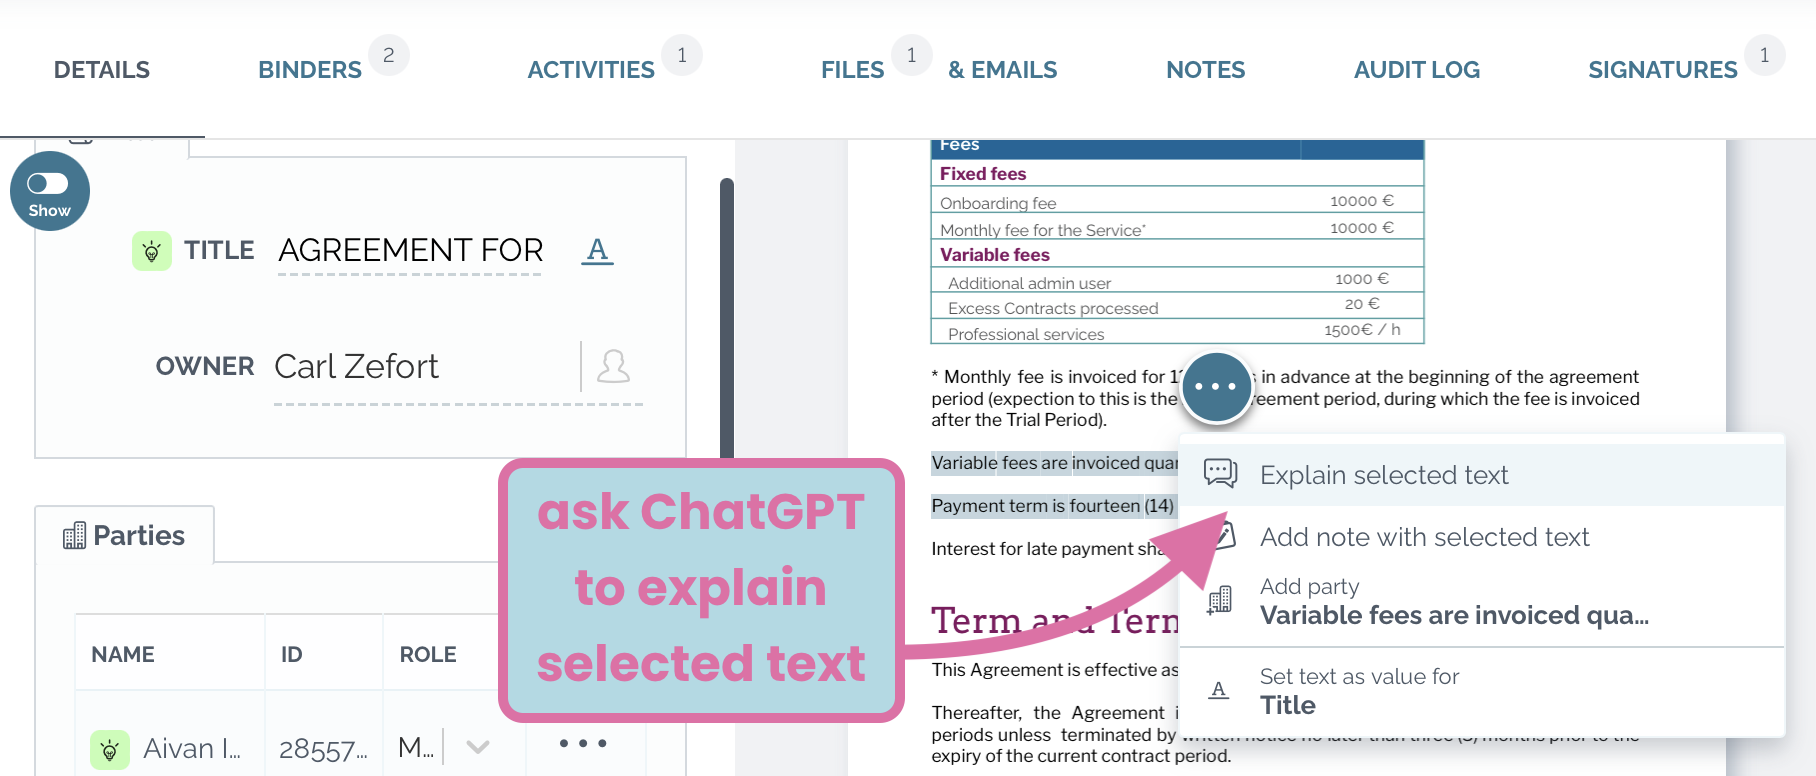 zefort ask chatGPT to explain selected text